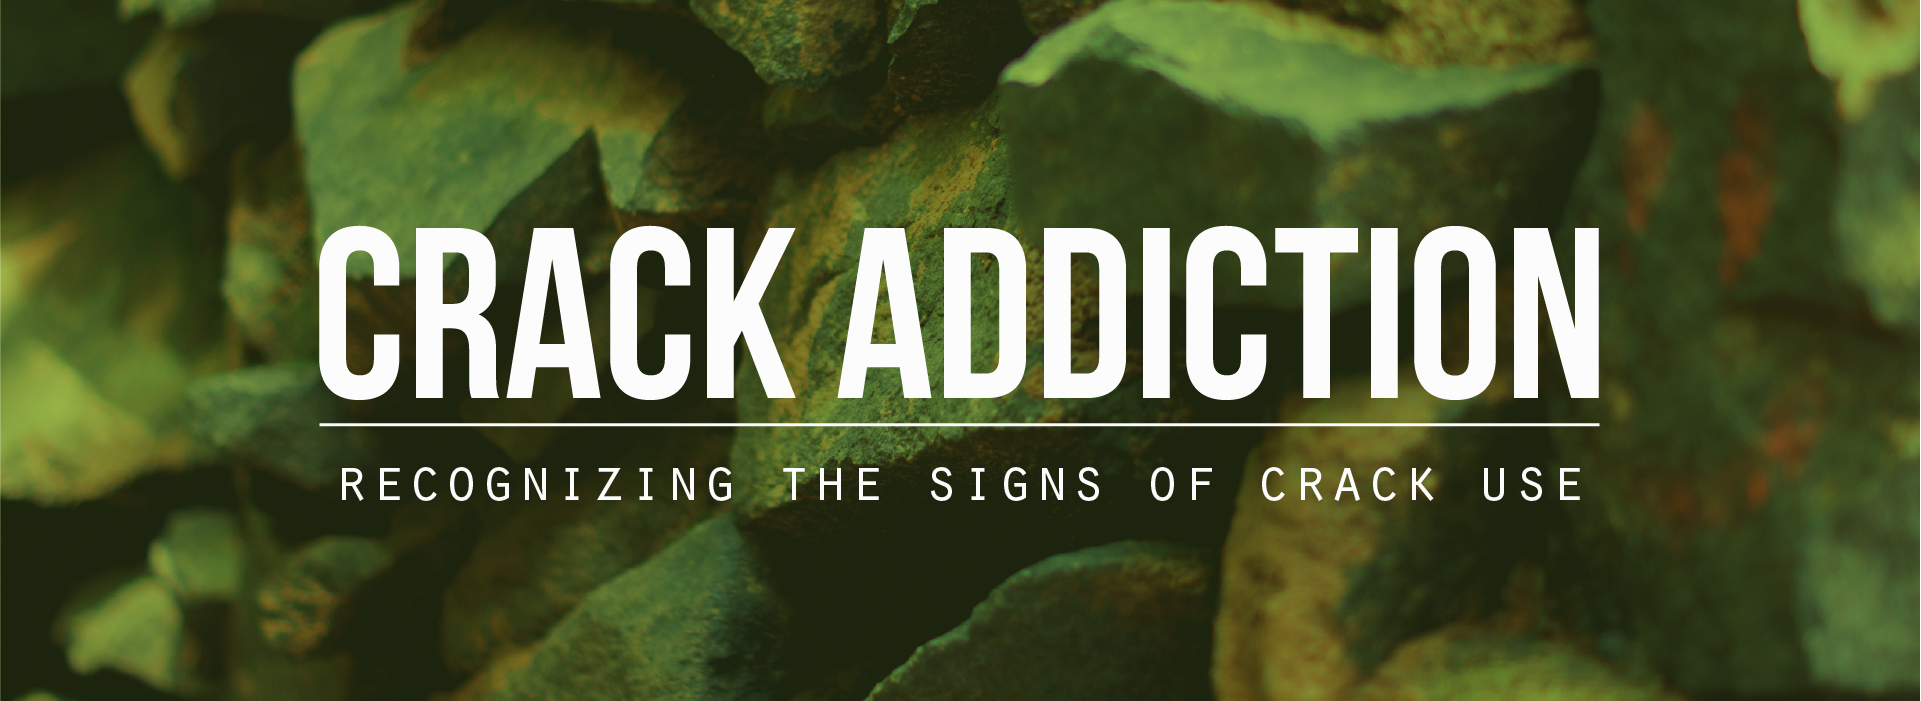 Crack addiction. Recognizing the signs of crack use